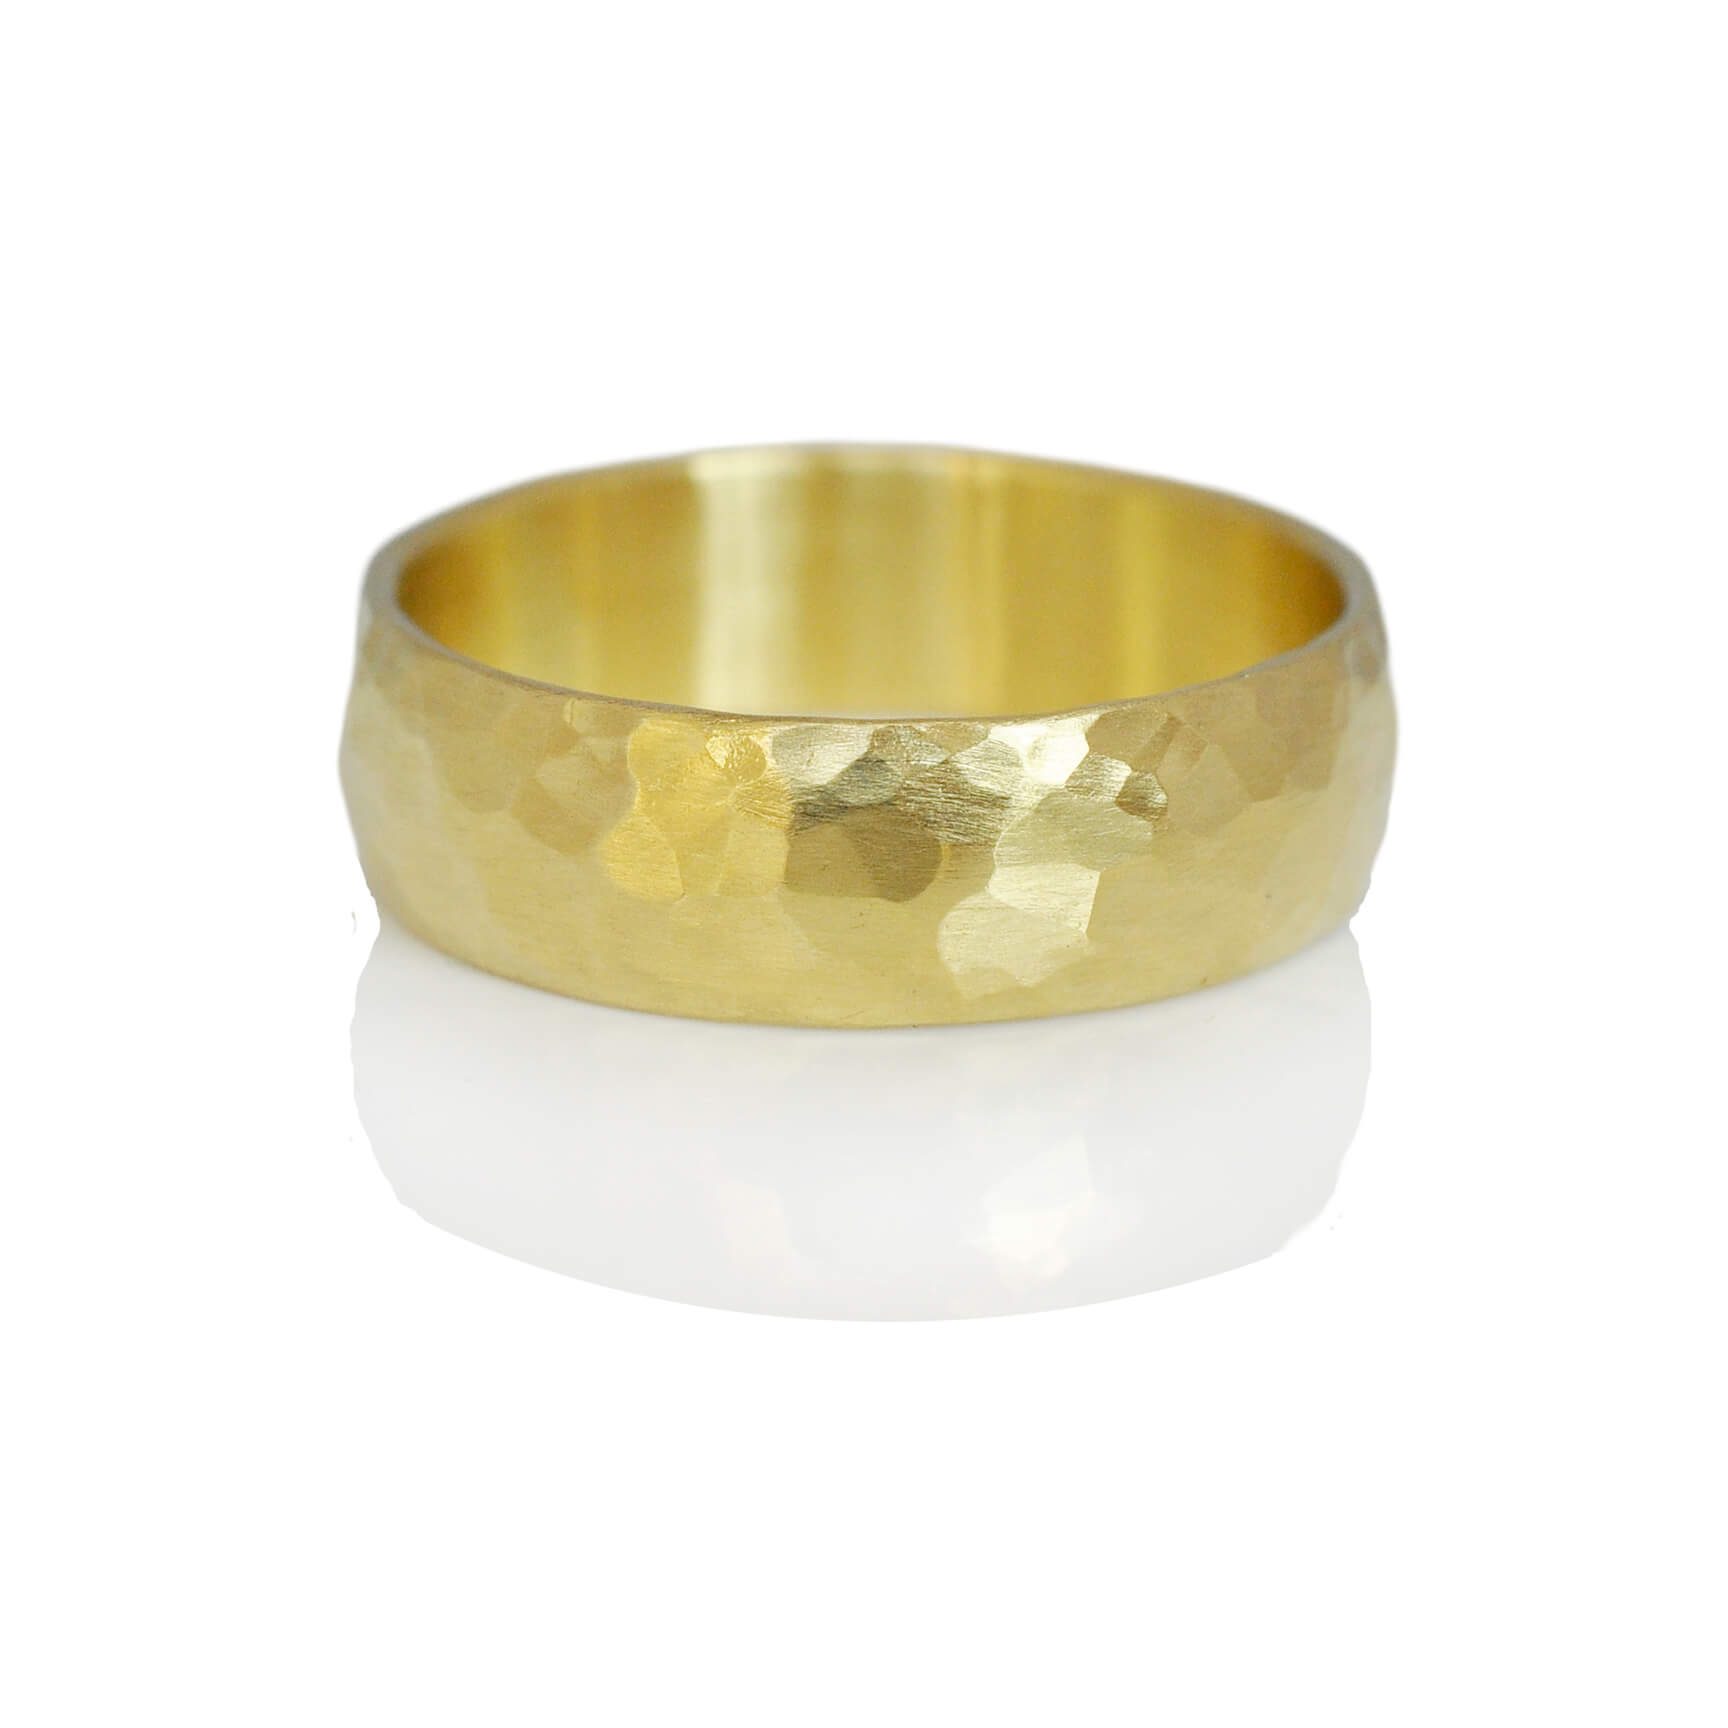 Facet hammered yellow gold wedding band. Handmade with recycled gold, by EC Design Jewelry in Minneapolis, MN..